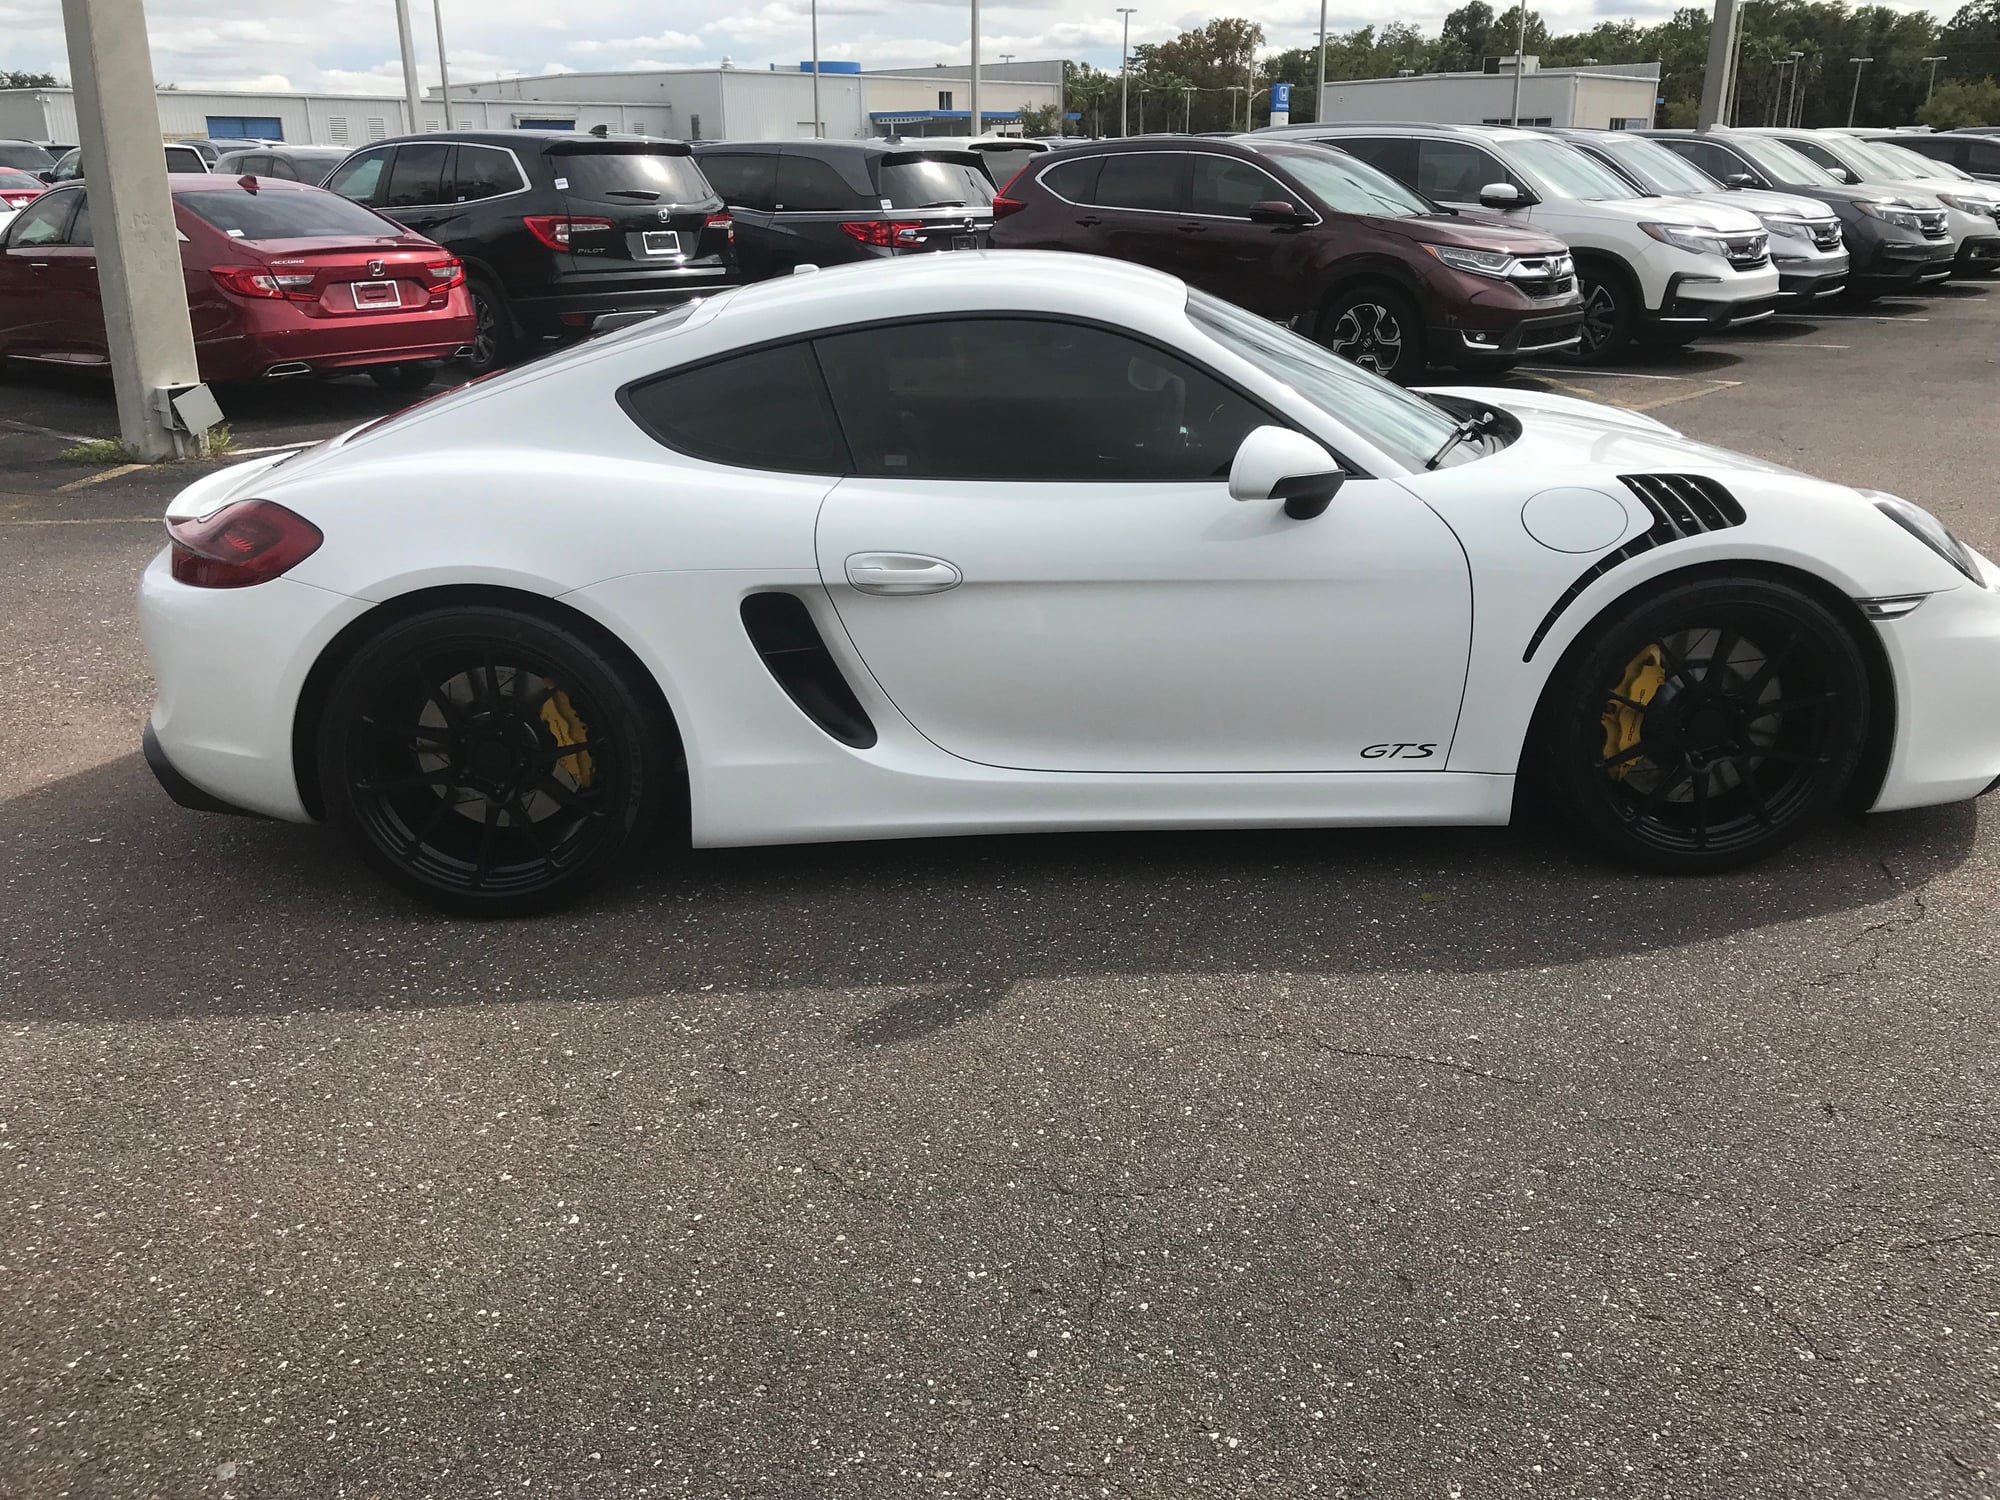 2016 Porsche Cayman - For sale:2016 Cayman GTS with 4.0l X51 swap and tons of goodies. Incredible build - Used - VIN WP0AB2A87GK186343 - 12,500 Miles - 6 cyl - 2WD - Automatic - Coupe - White - Jacksonville, FL 32223, United States